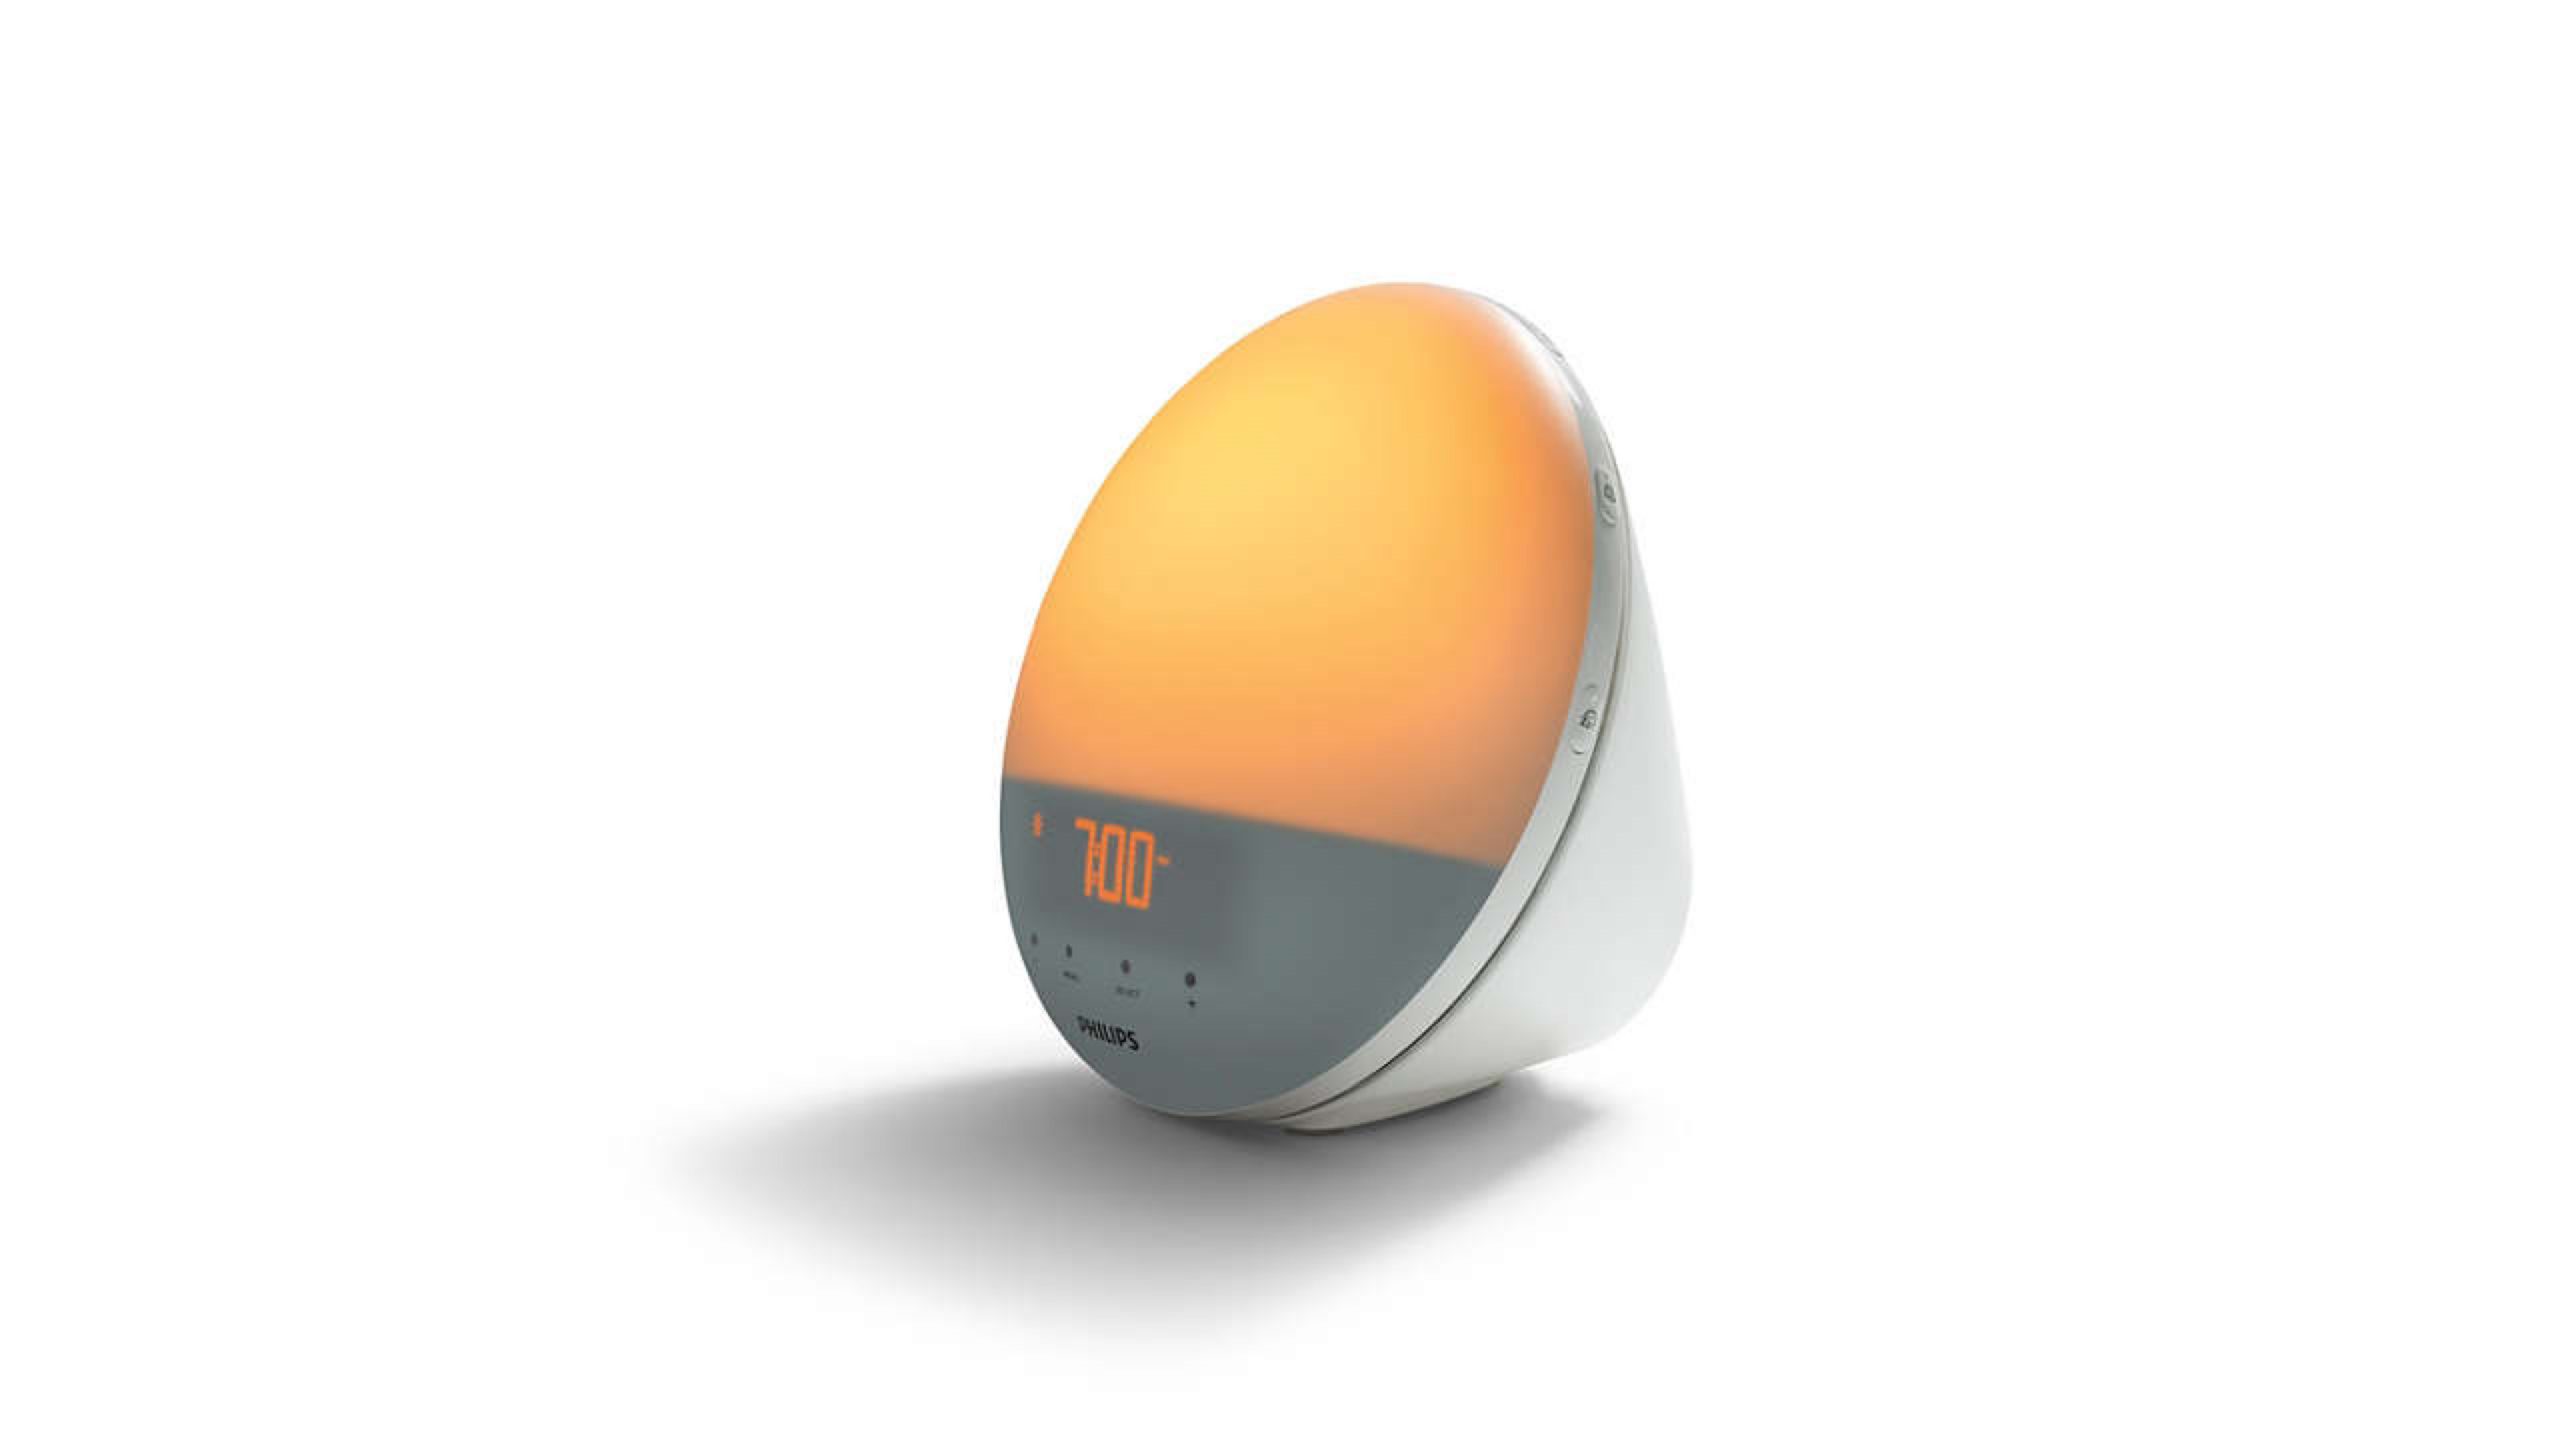 philips smart wake up light, father's day gift ideas